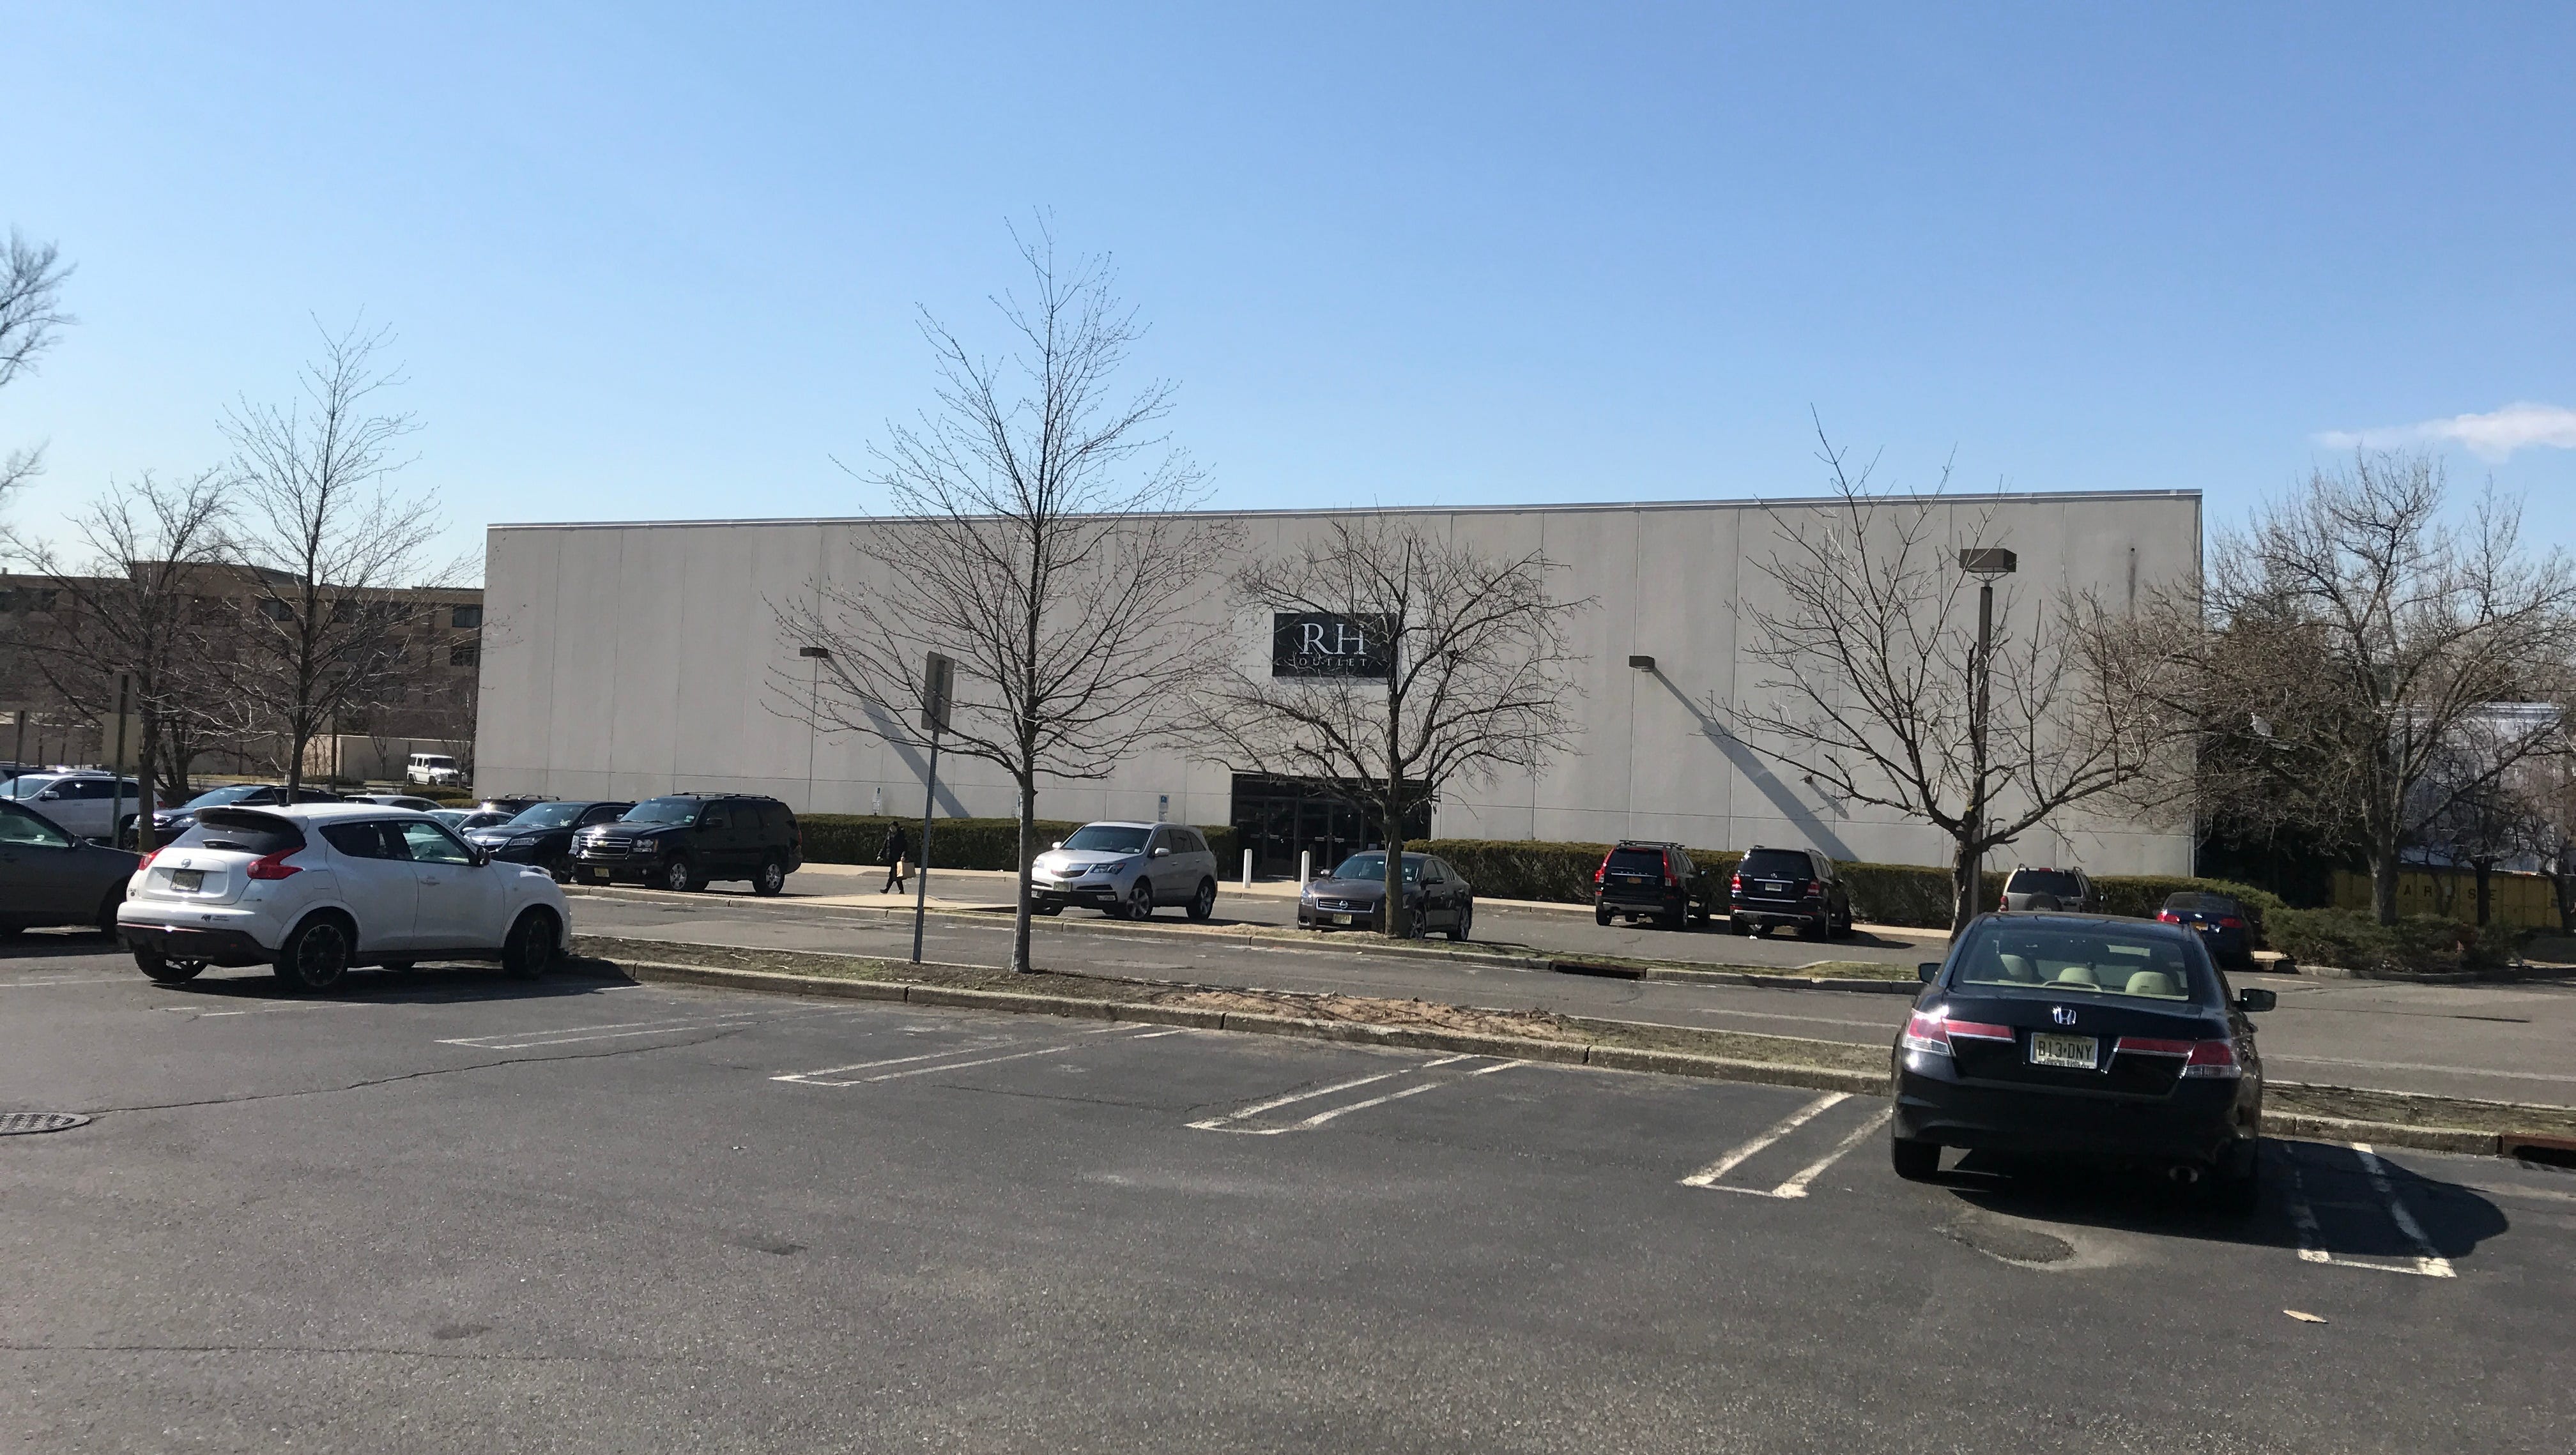 Nice restoration hardware outlet westbury Used Car Superstore Proposed For Syms Site In Paramus